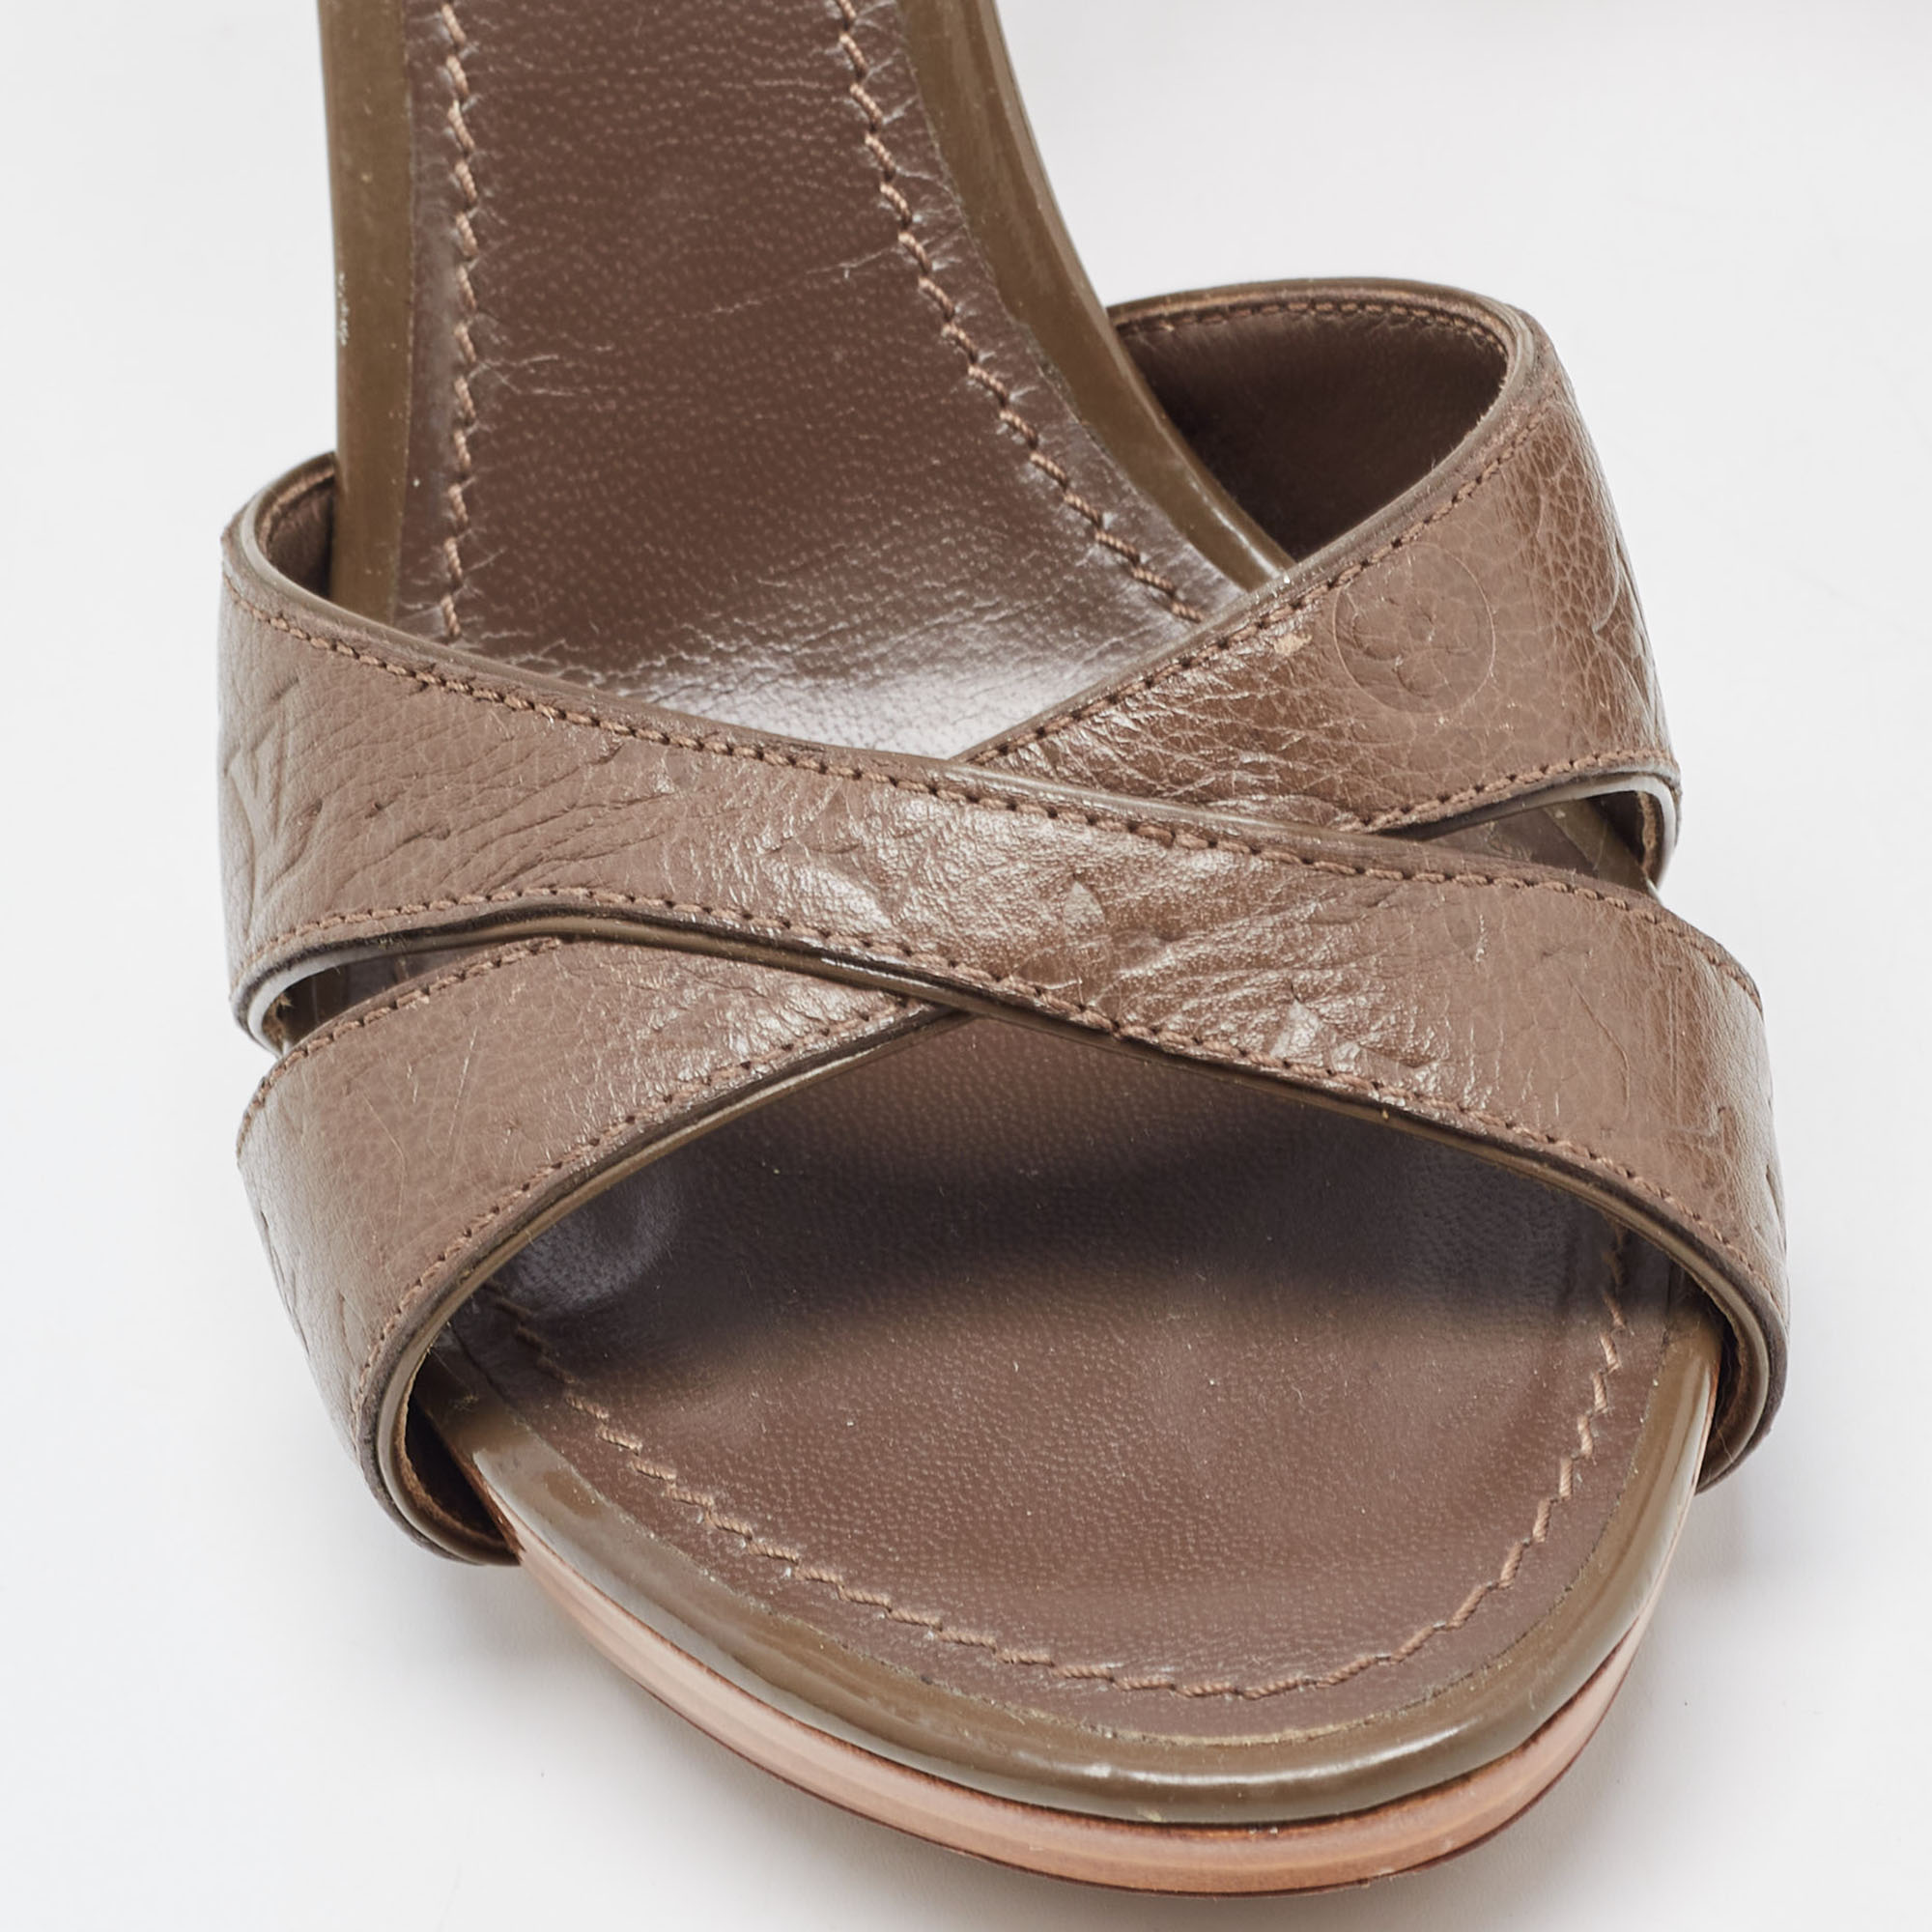 Louis Vuitton Brown Leather Ankle Strap Sandals Size 38